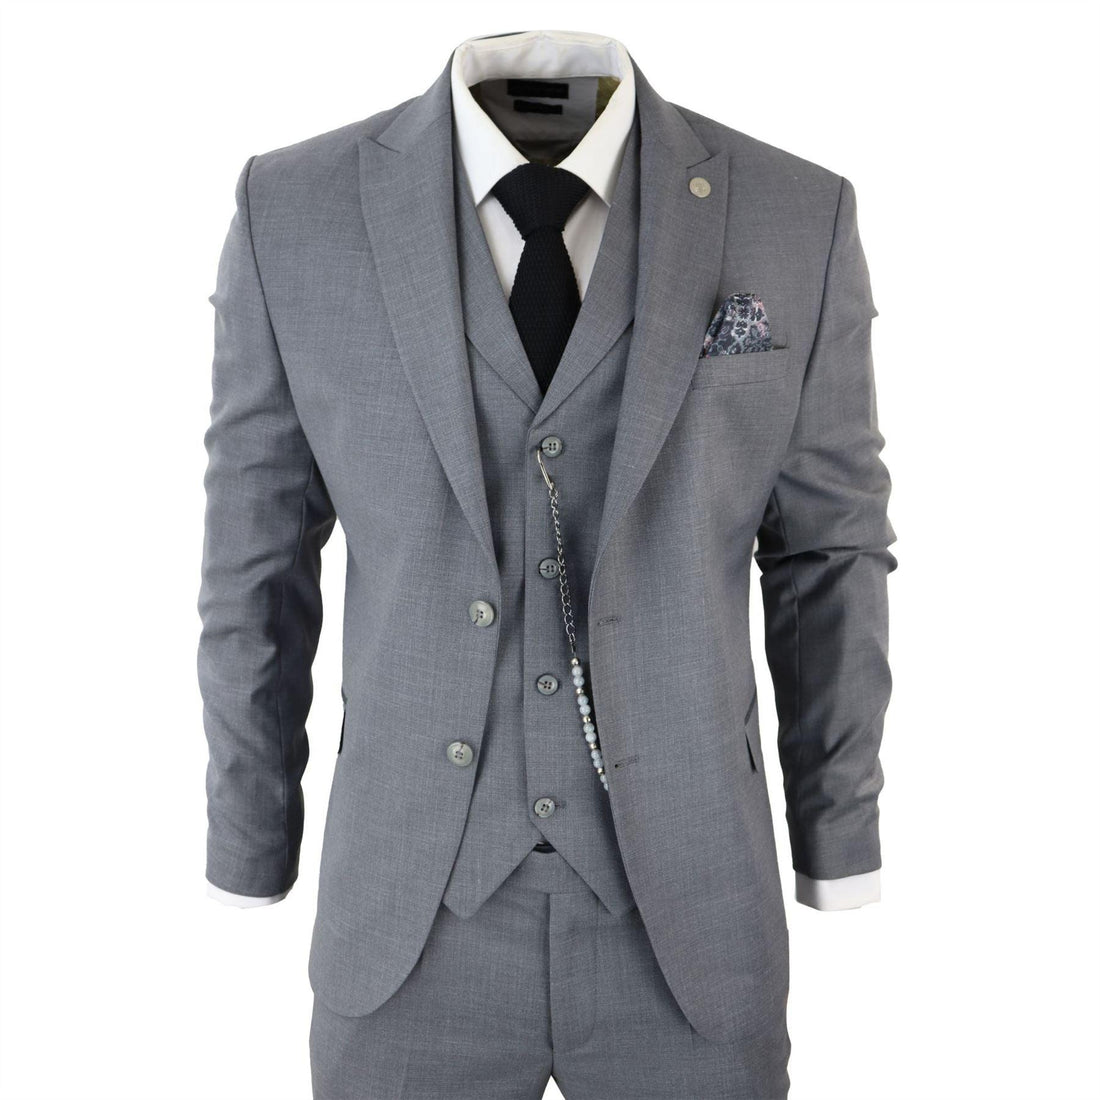 Mens Classic 3 Piece Suit Grey Pocket Chain Wedding Tailored Fit Vintage Formal - Knighthood Store